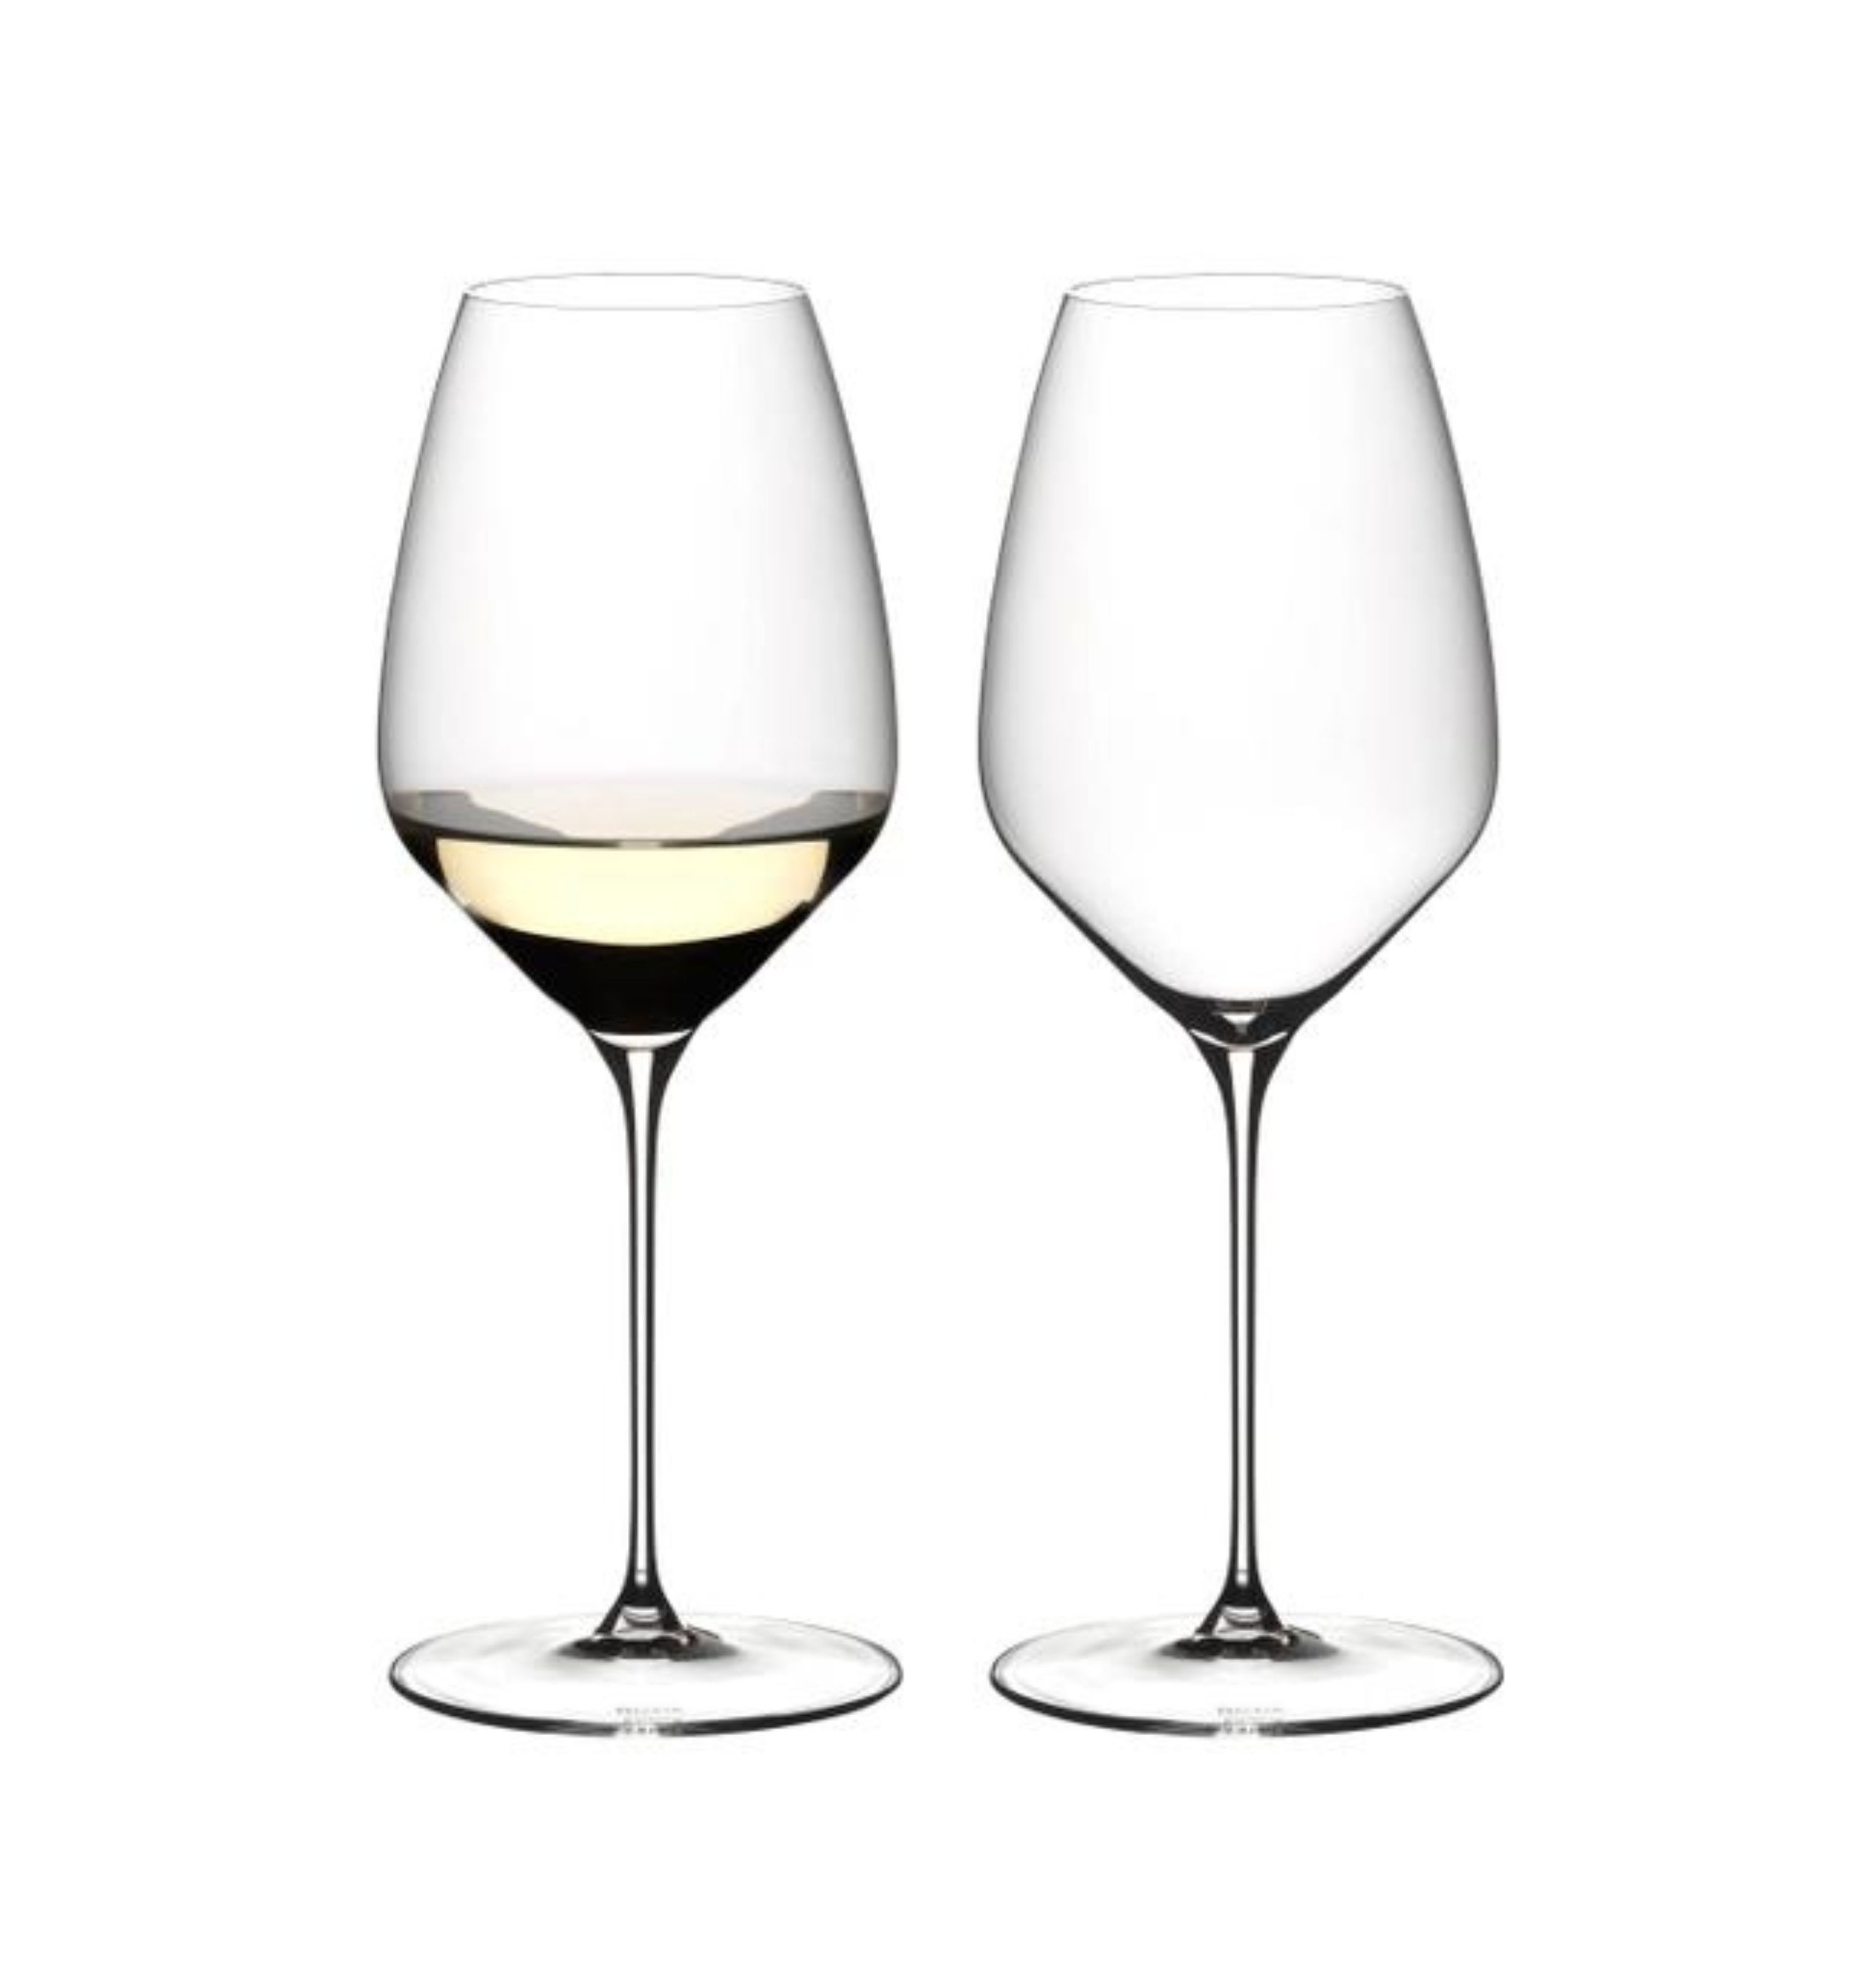 2 glasses of Riesling Veloce Riedel 